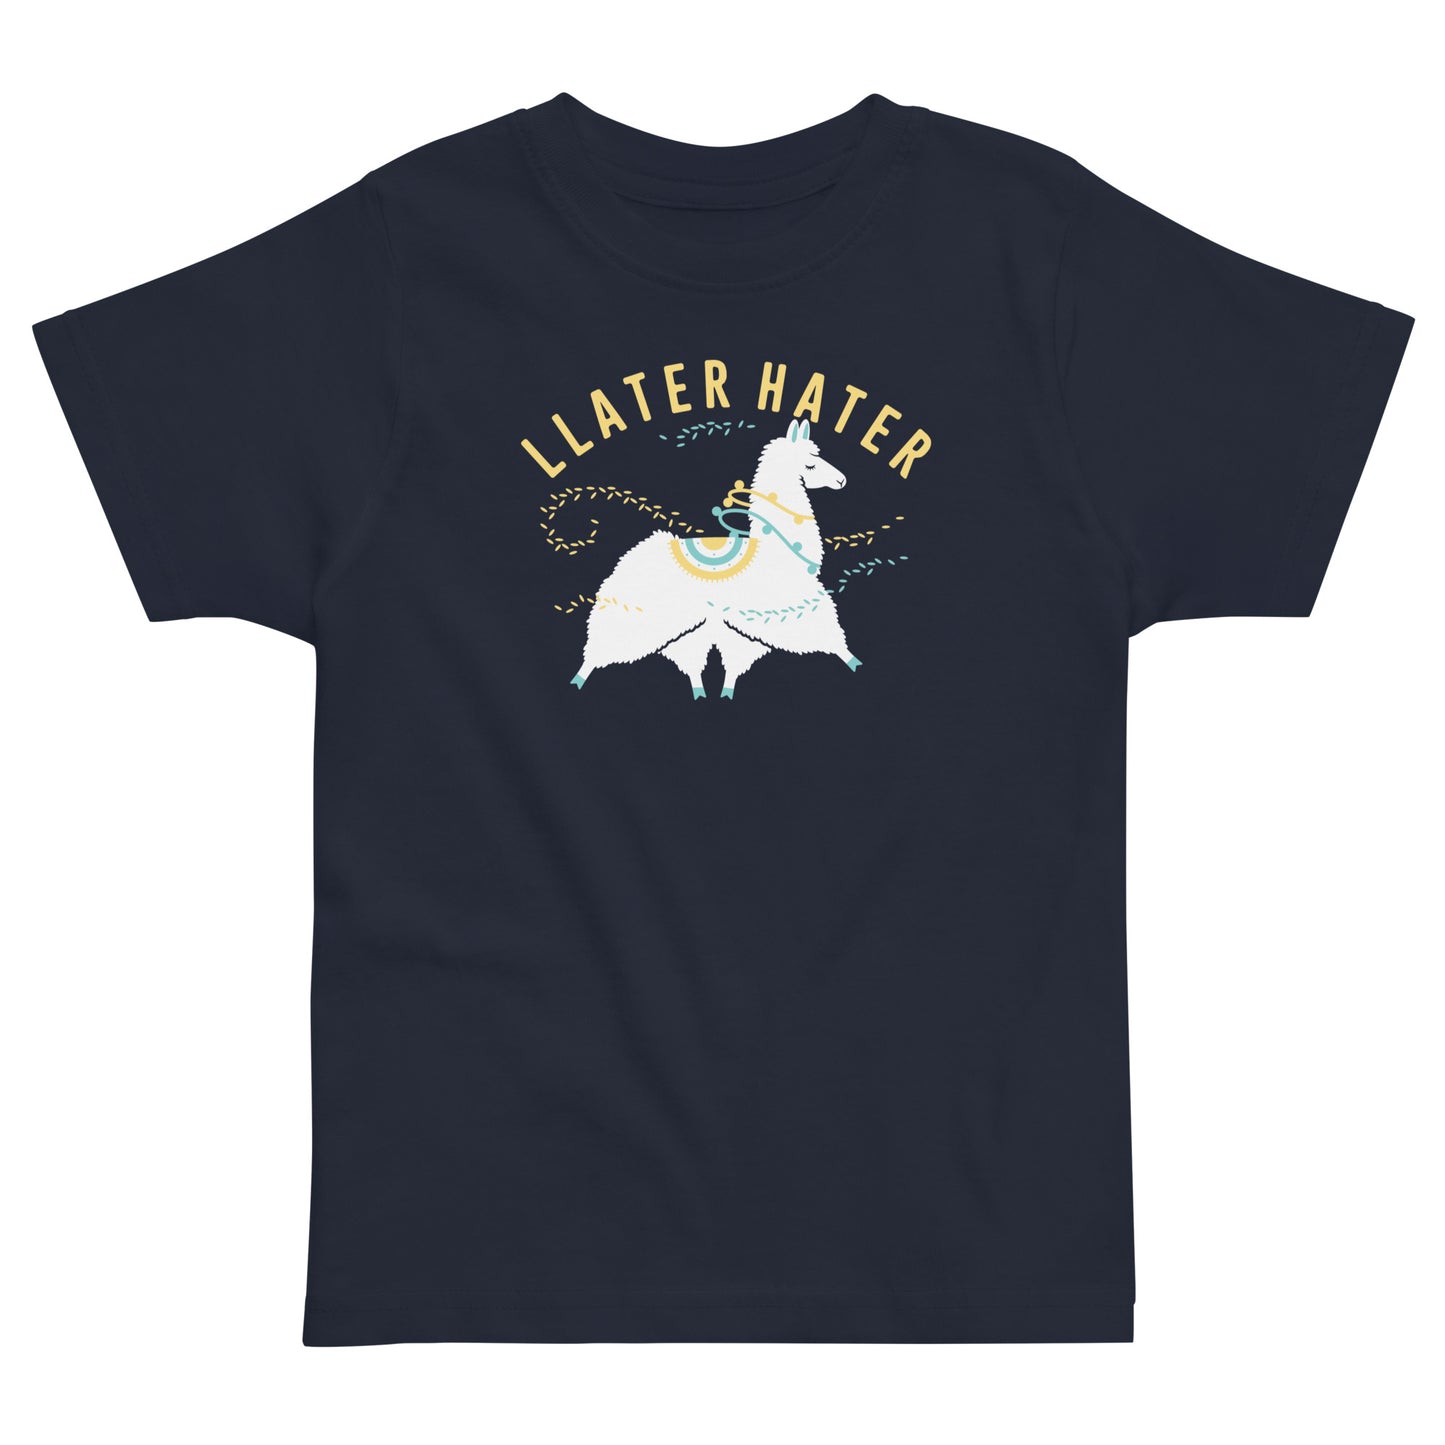 Llater Hater Kid's Toddler Tee